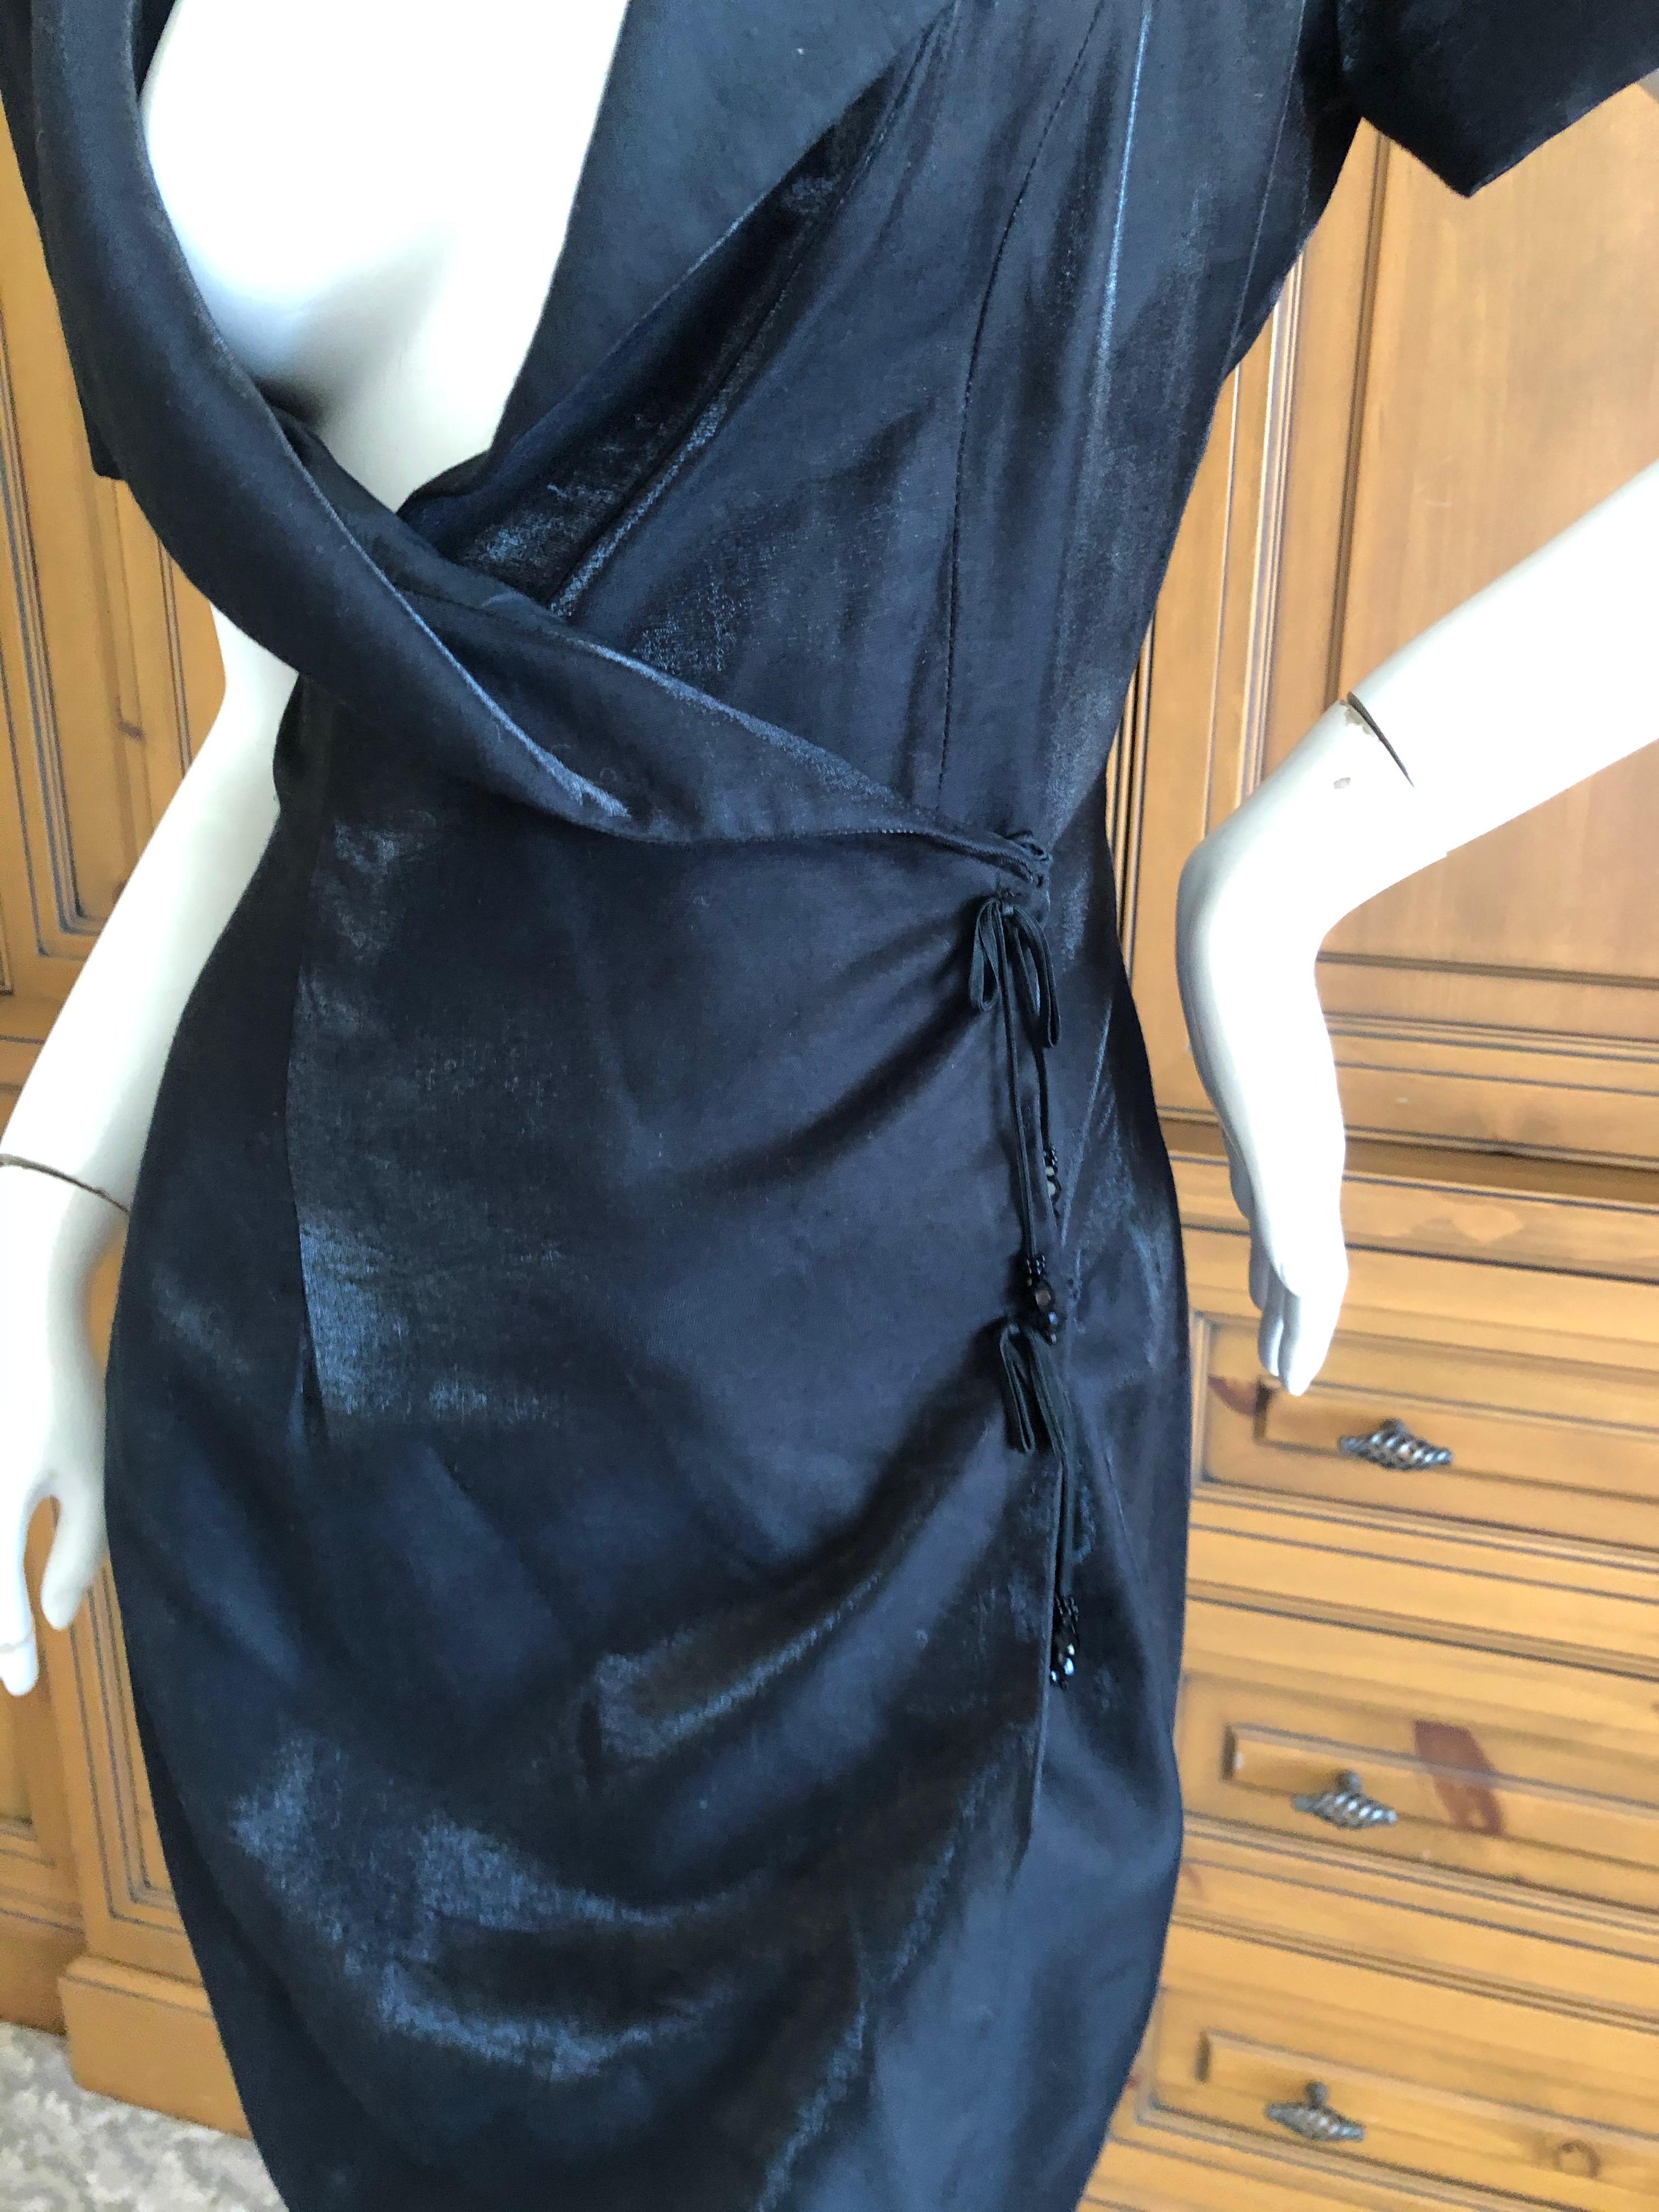 Christian Dior 1992 Numbered Demi Couture Corset Laced Dress by Gianfranco Ferre For Sale 1